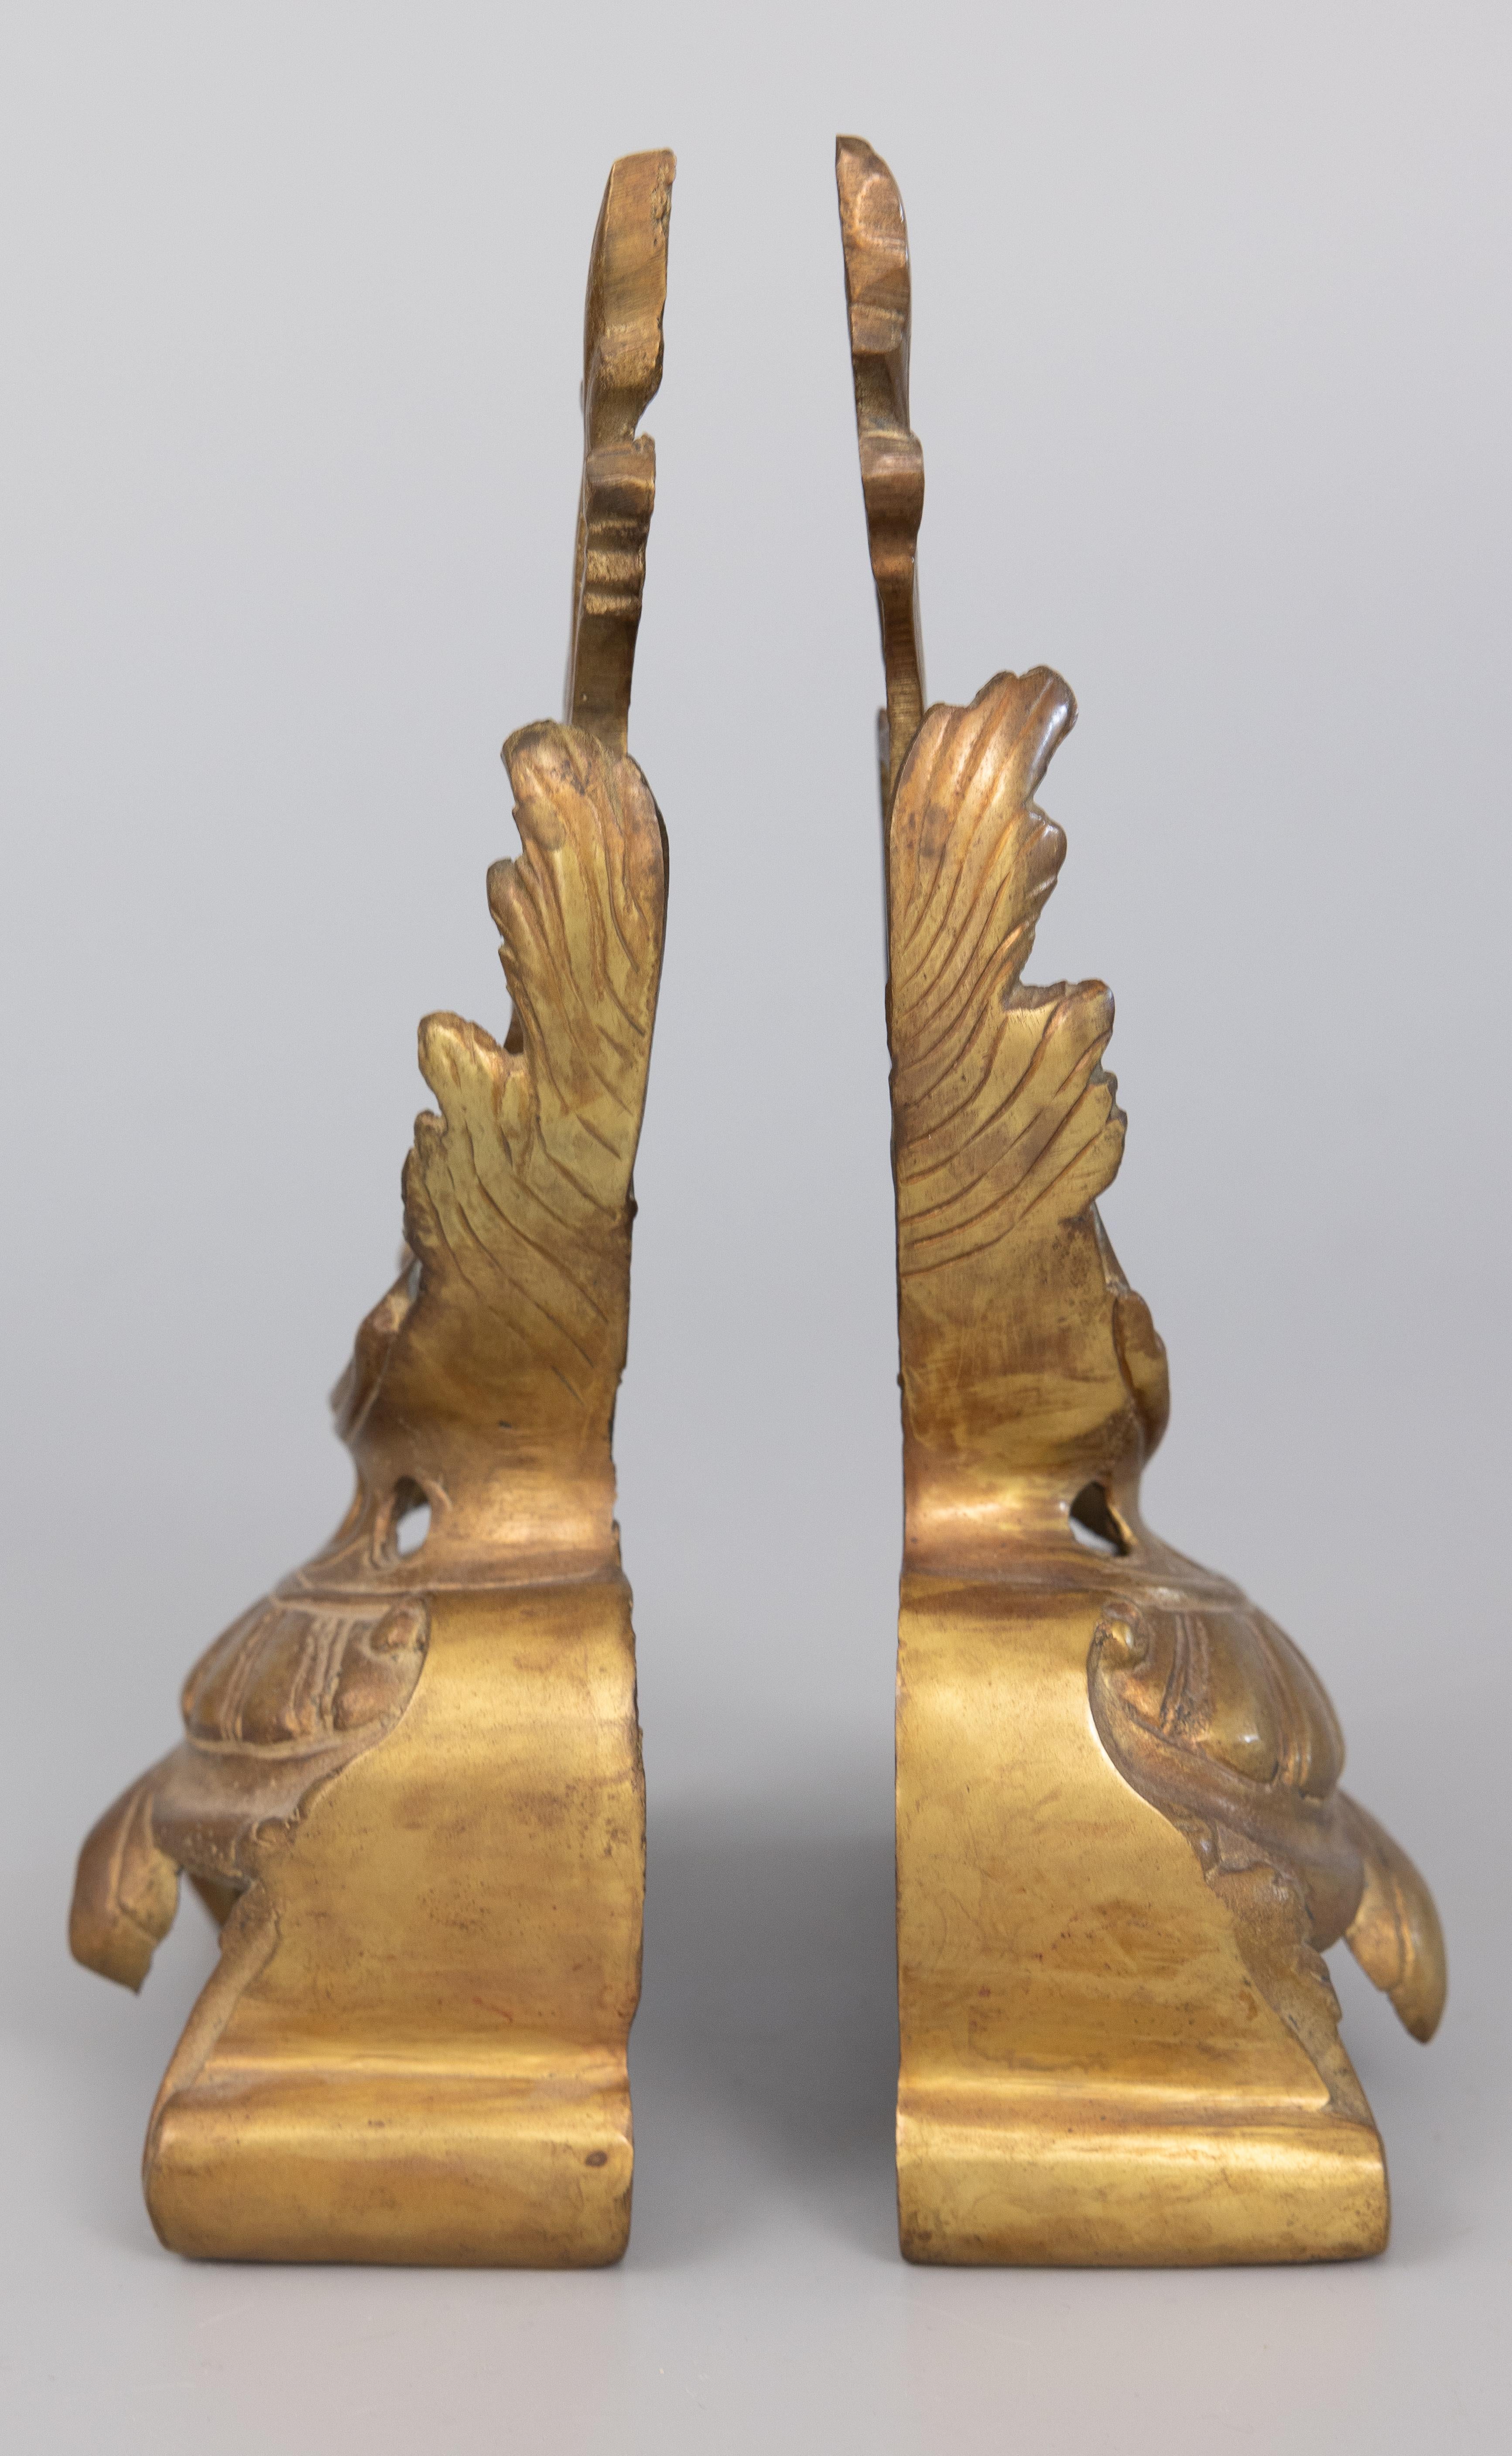 Pair of 19th Century French Brass Acanthus Leaf Mantel Ornaments Bookends In Good Condition For Sale In Pearland, TX